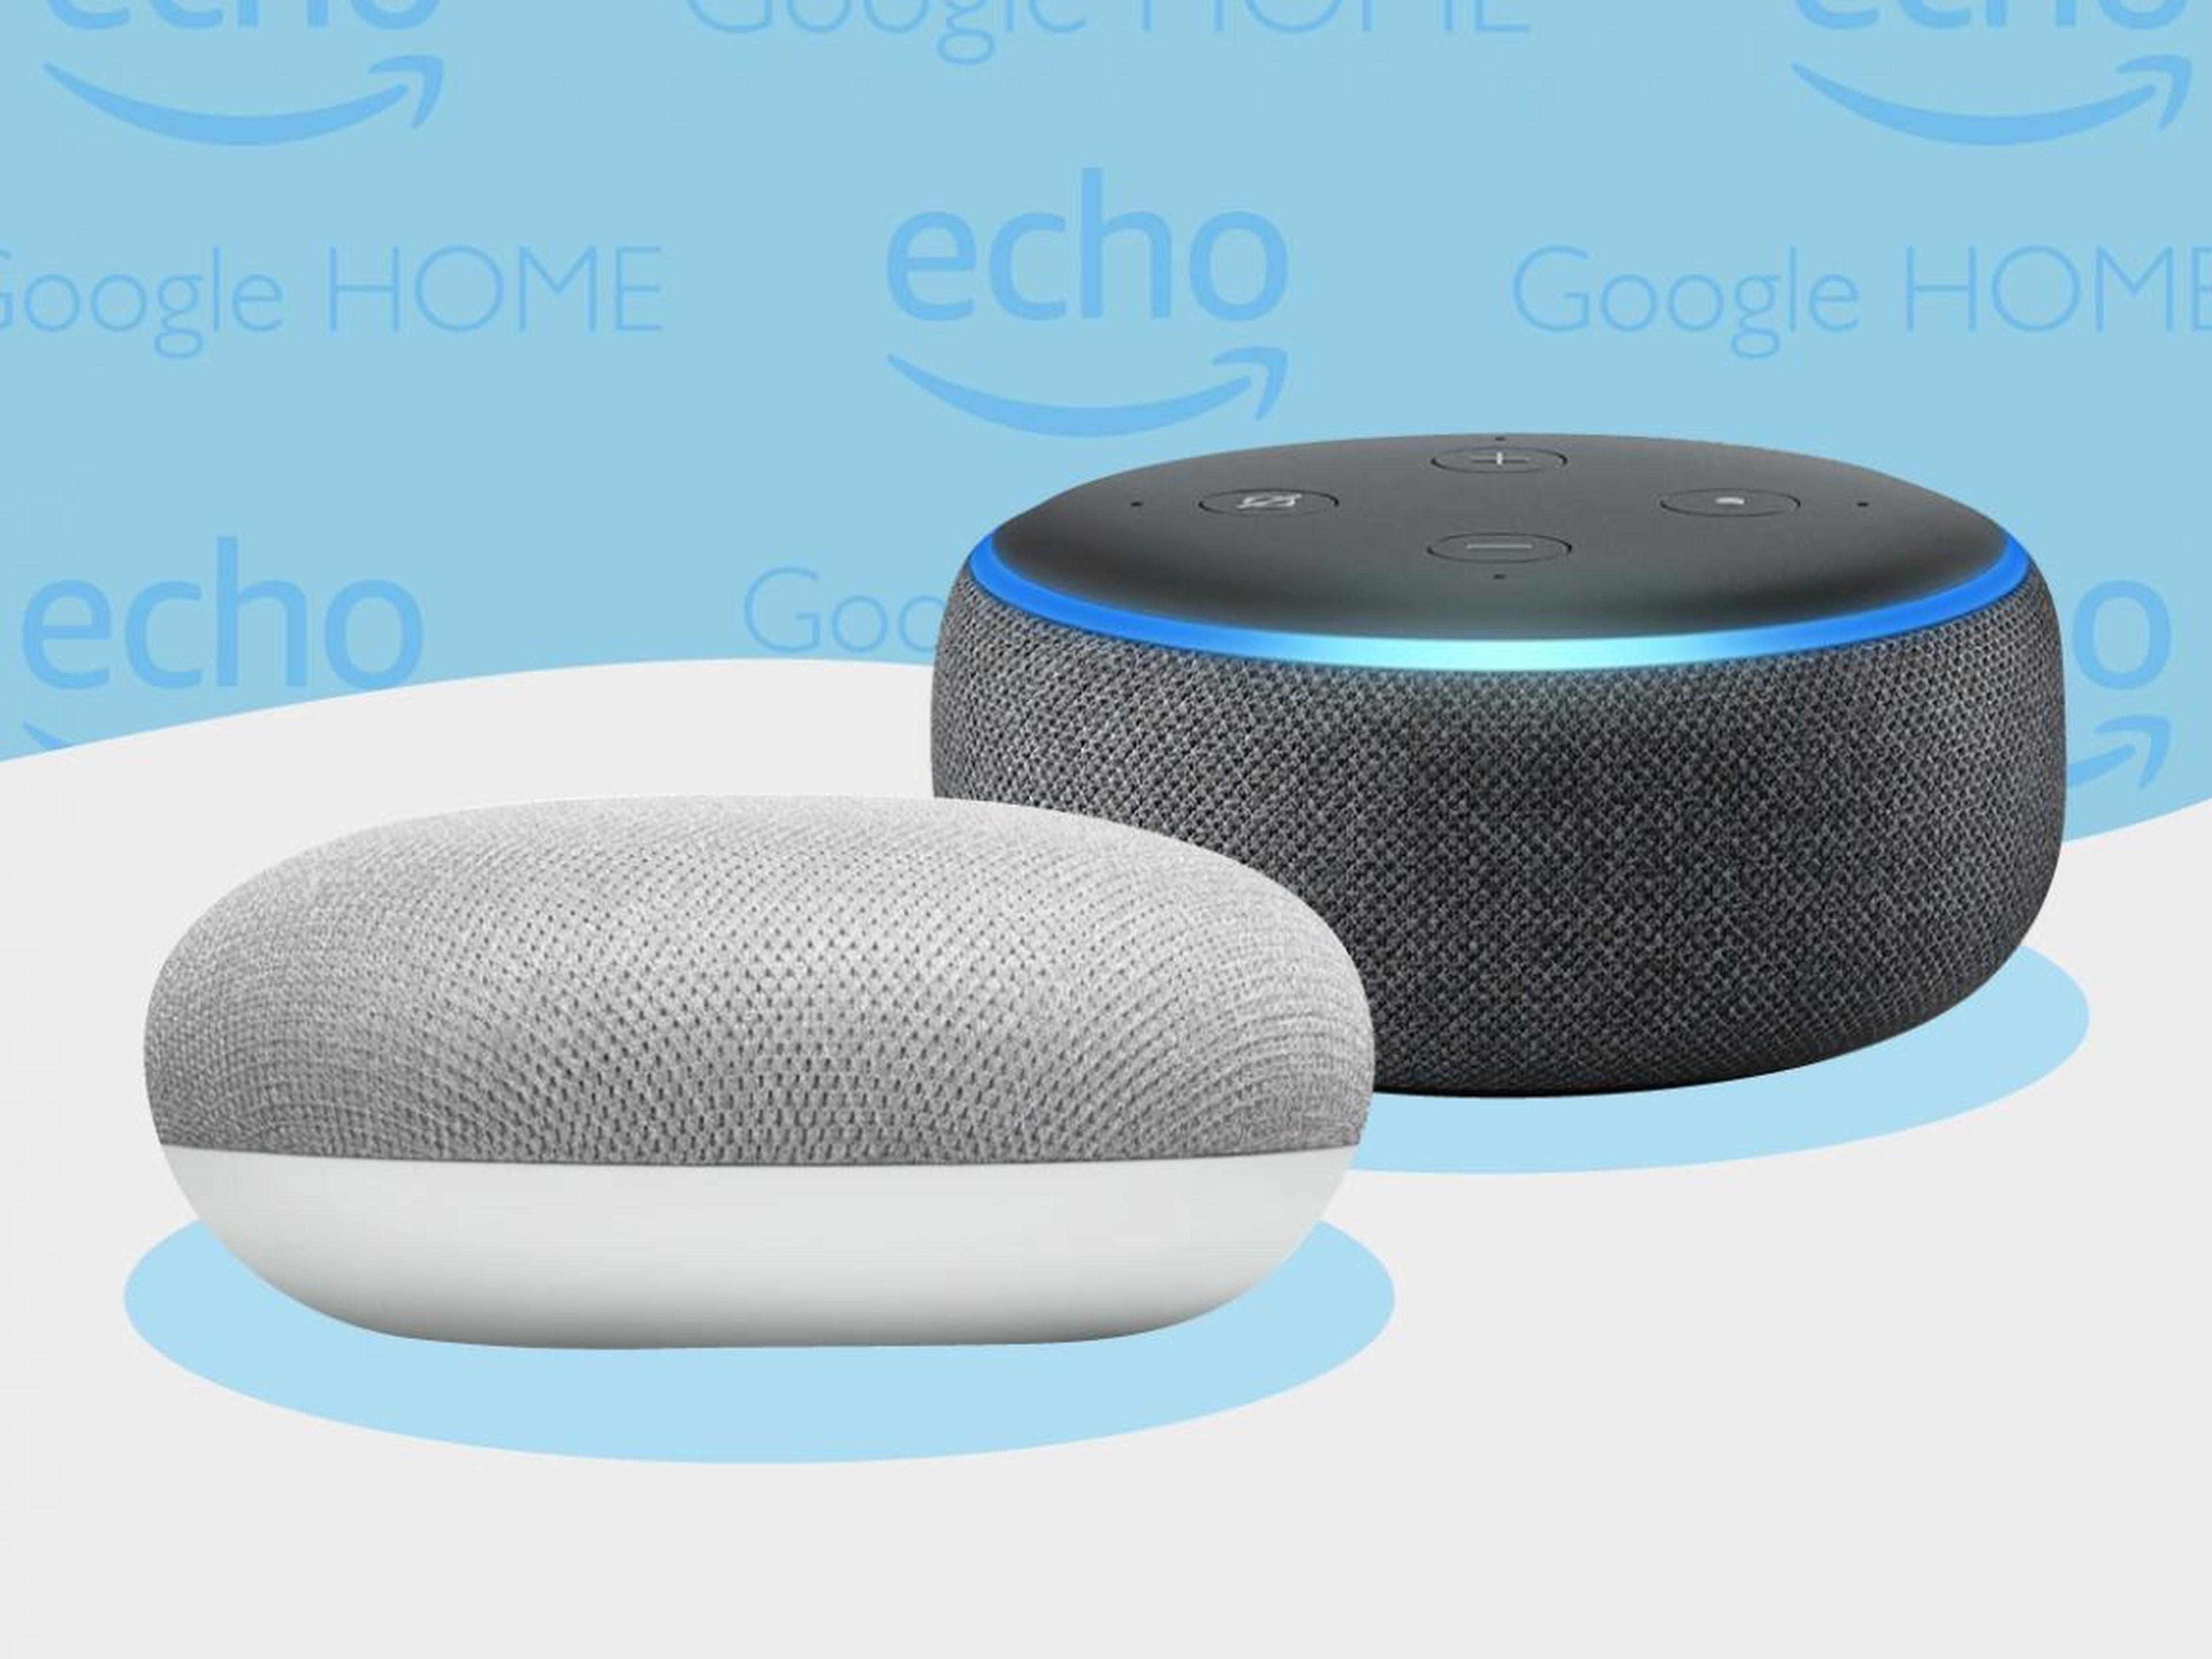 We tested the Amazon Echo Dot and Google Home Mini to see which one is the best small smart speaker